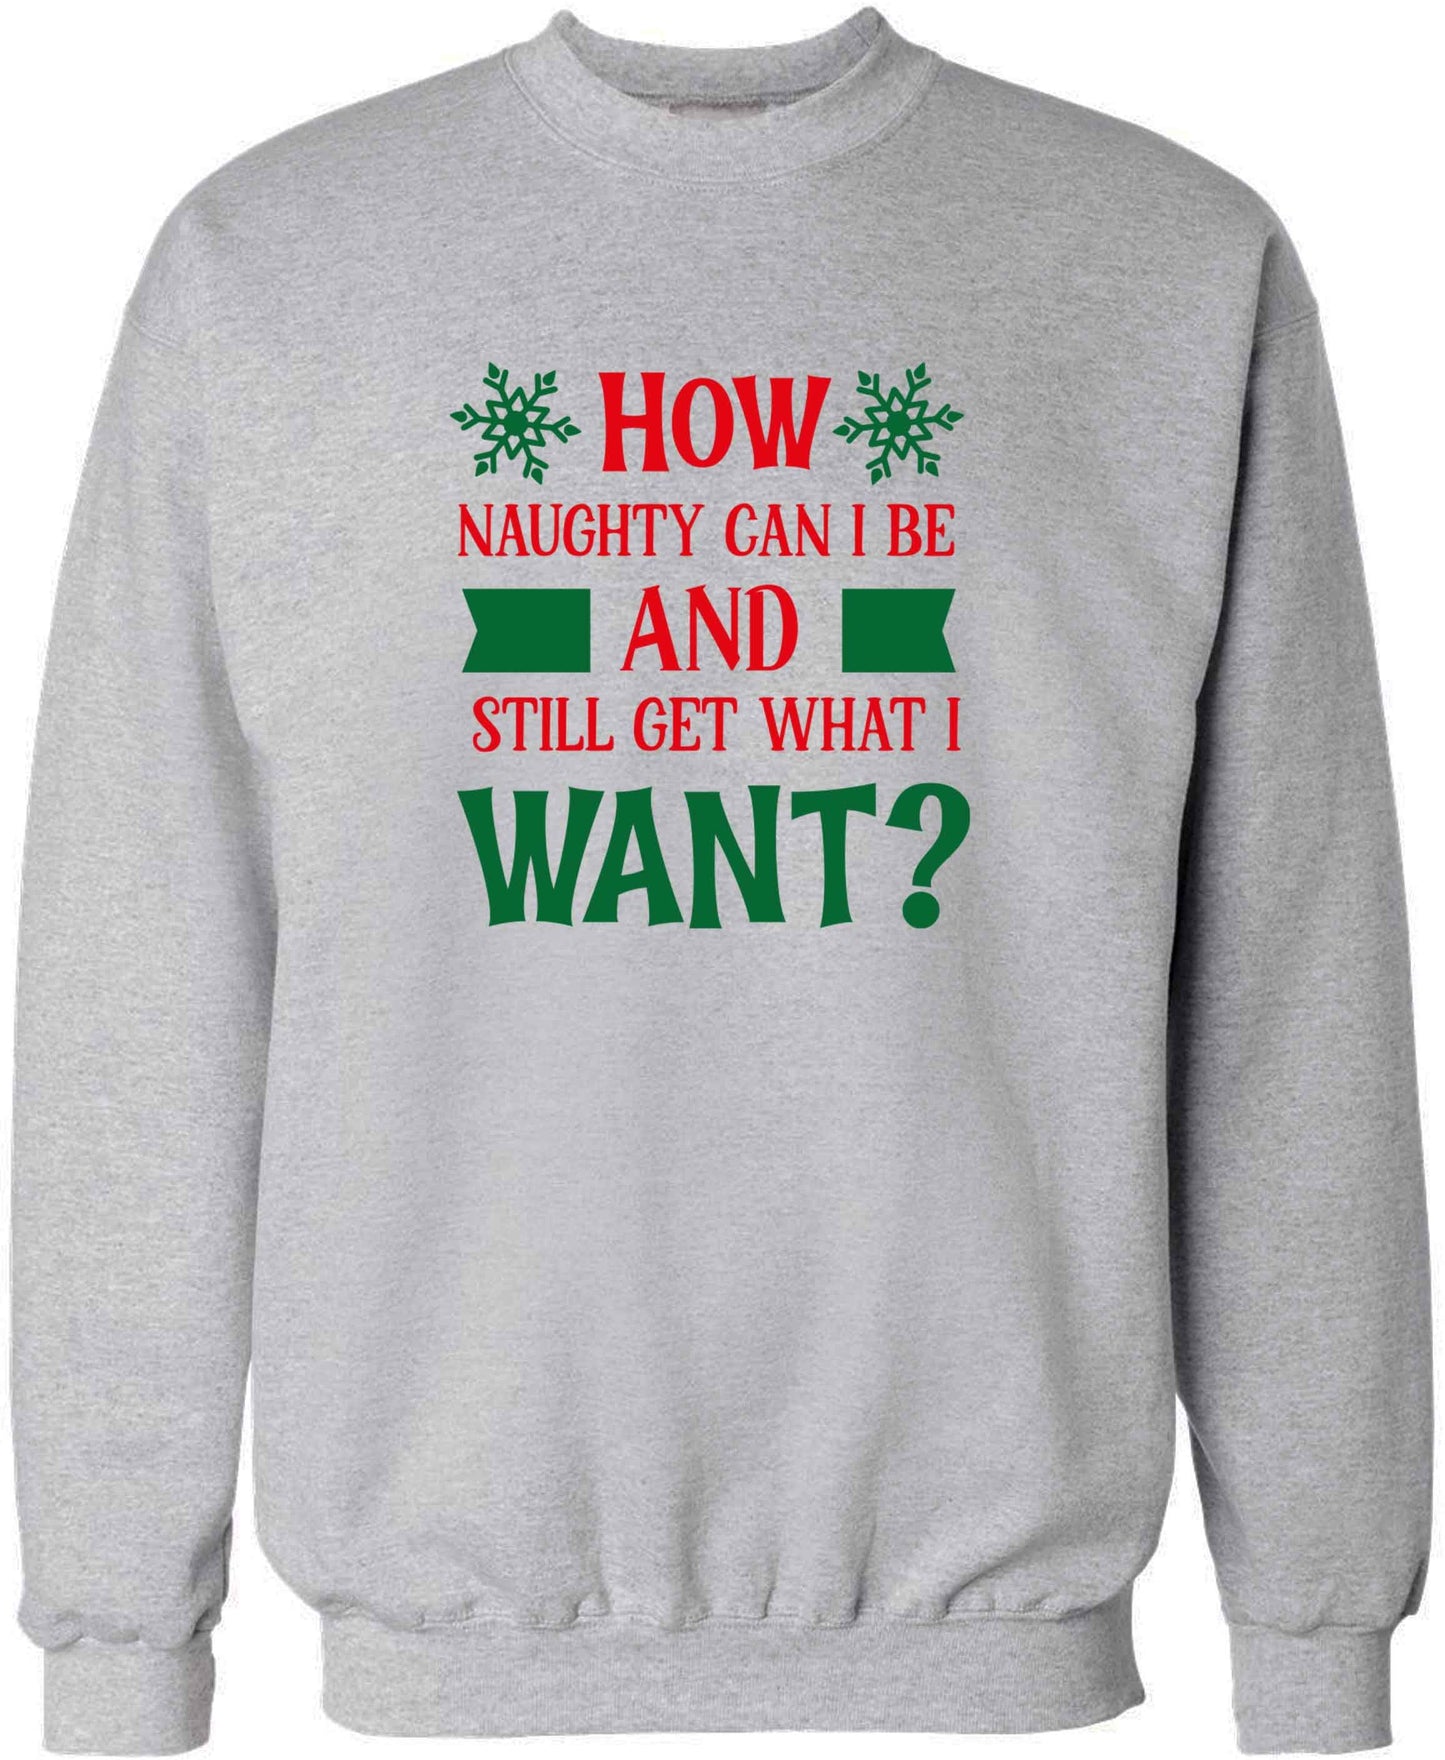 How naughty can I be and still get what I want? adult's unisex grey sweater 2XL